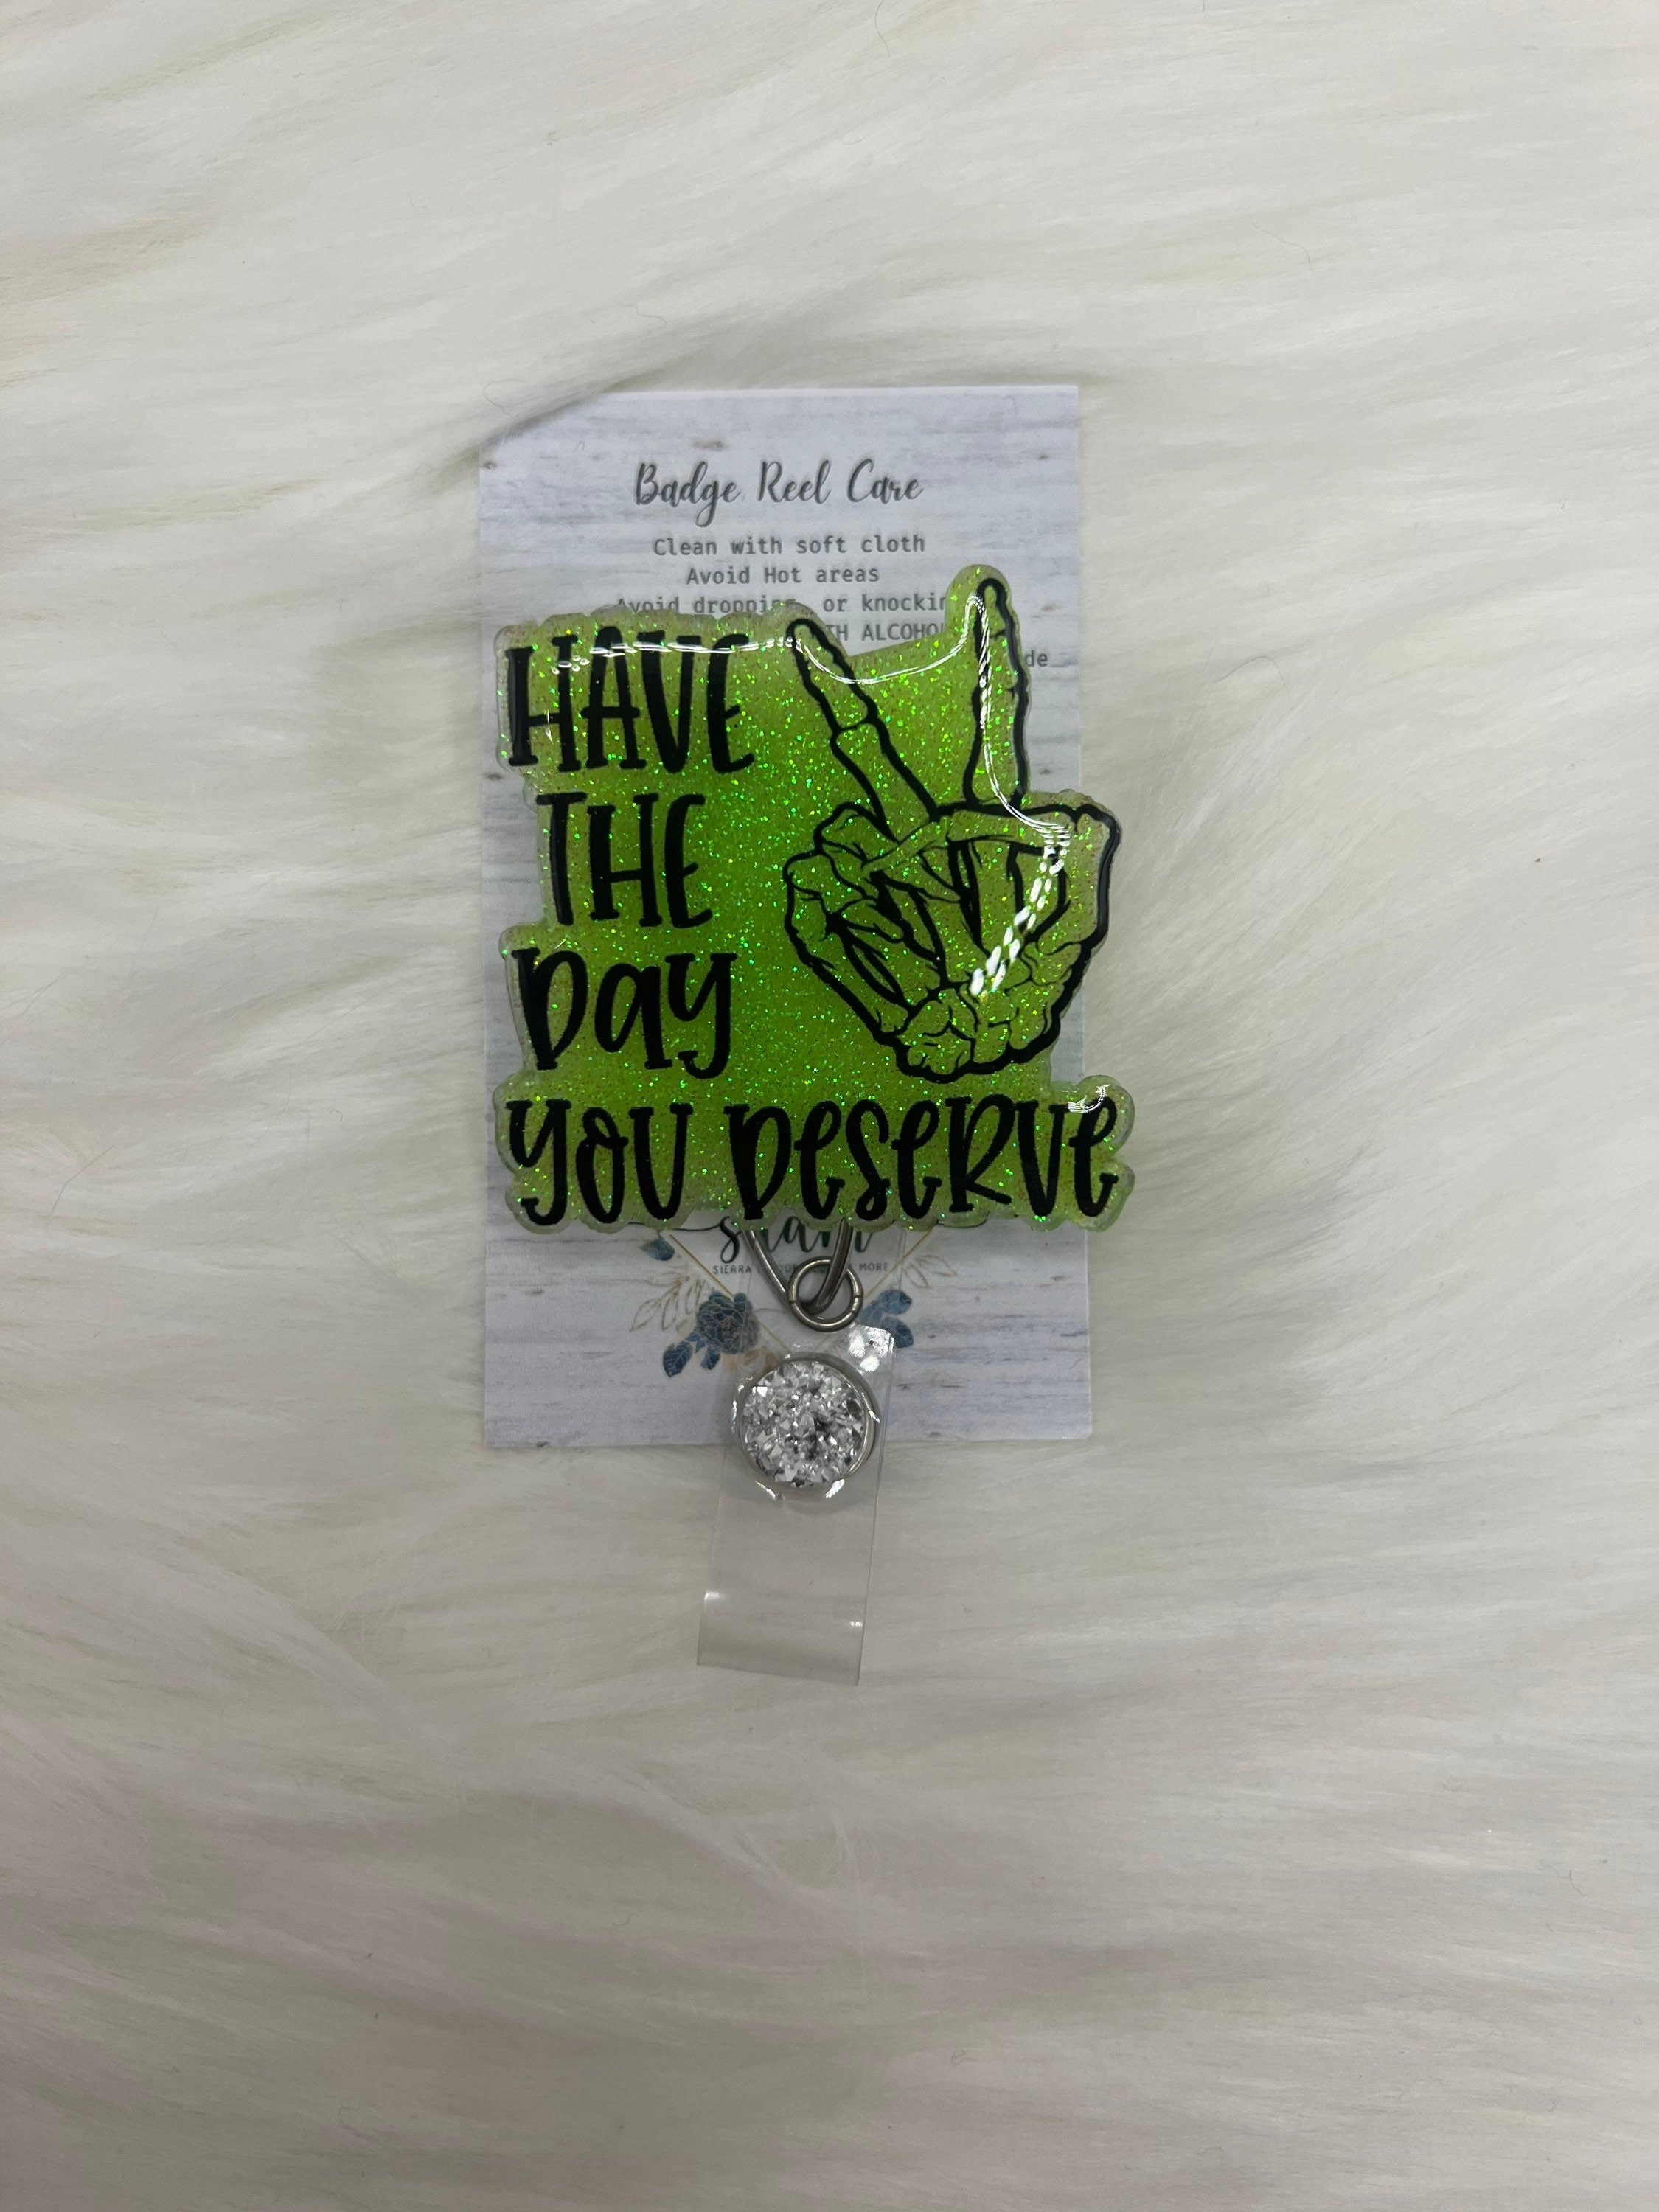 Have the day you deserve – Sierra's Door Decor & More